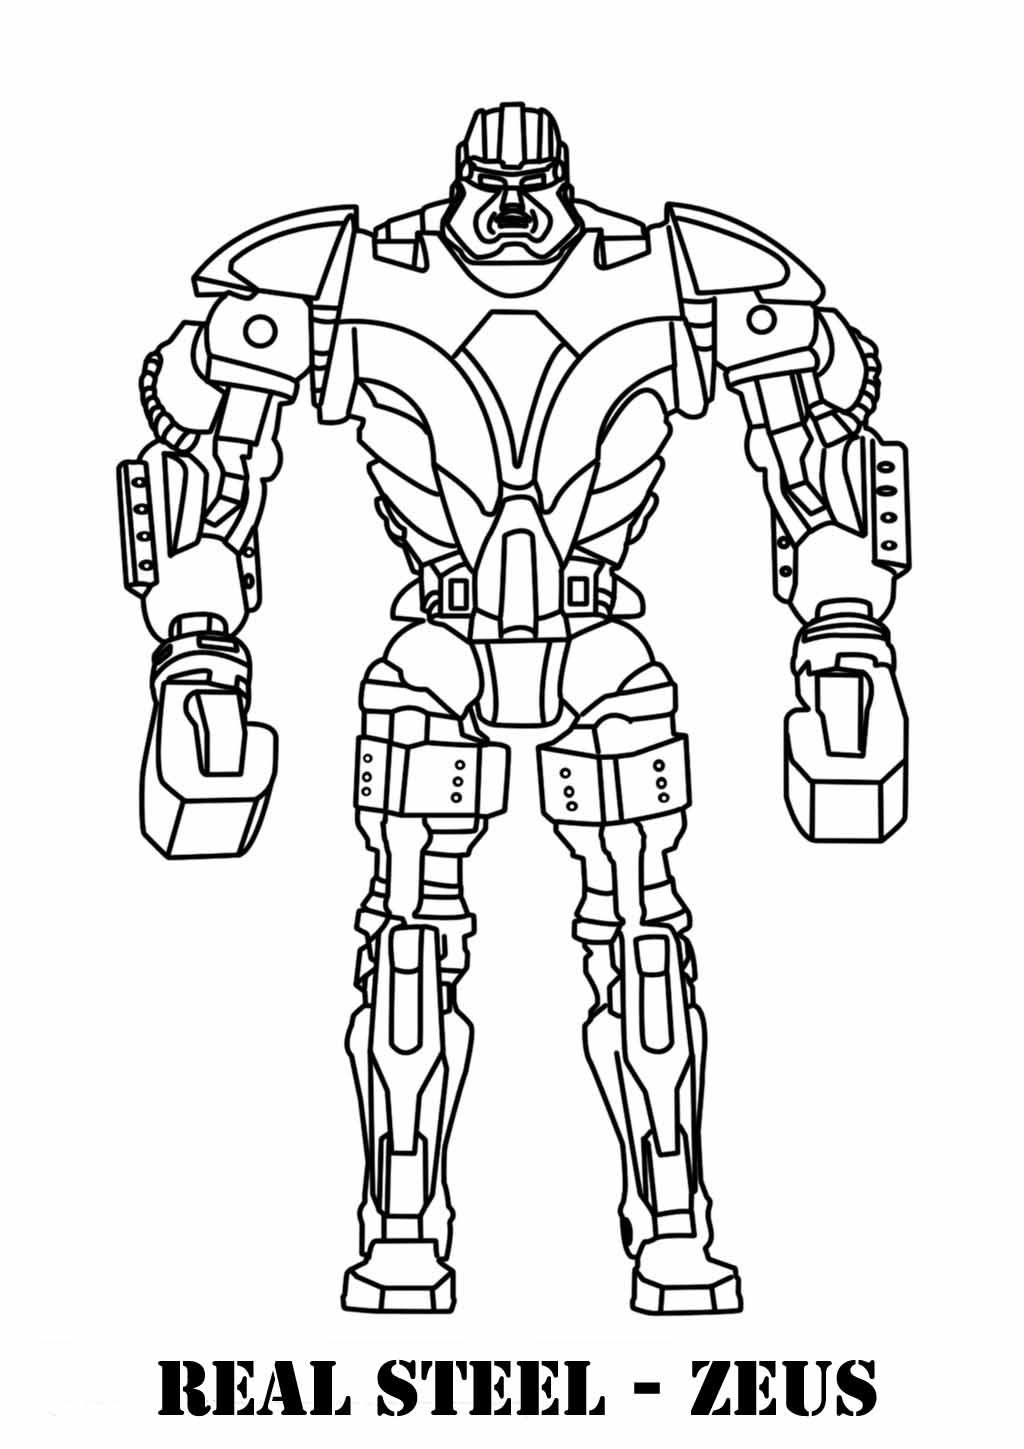 Robots Coloring Pages